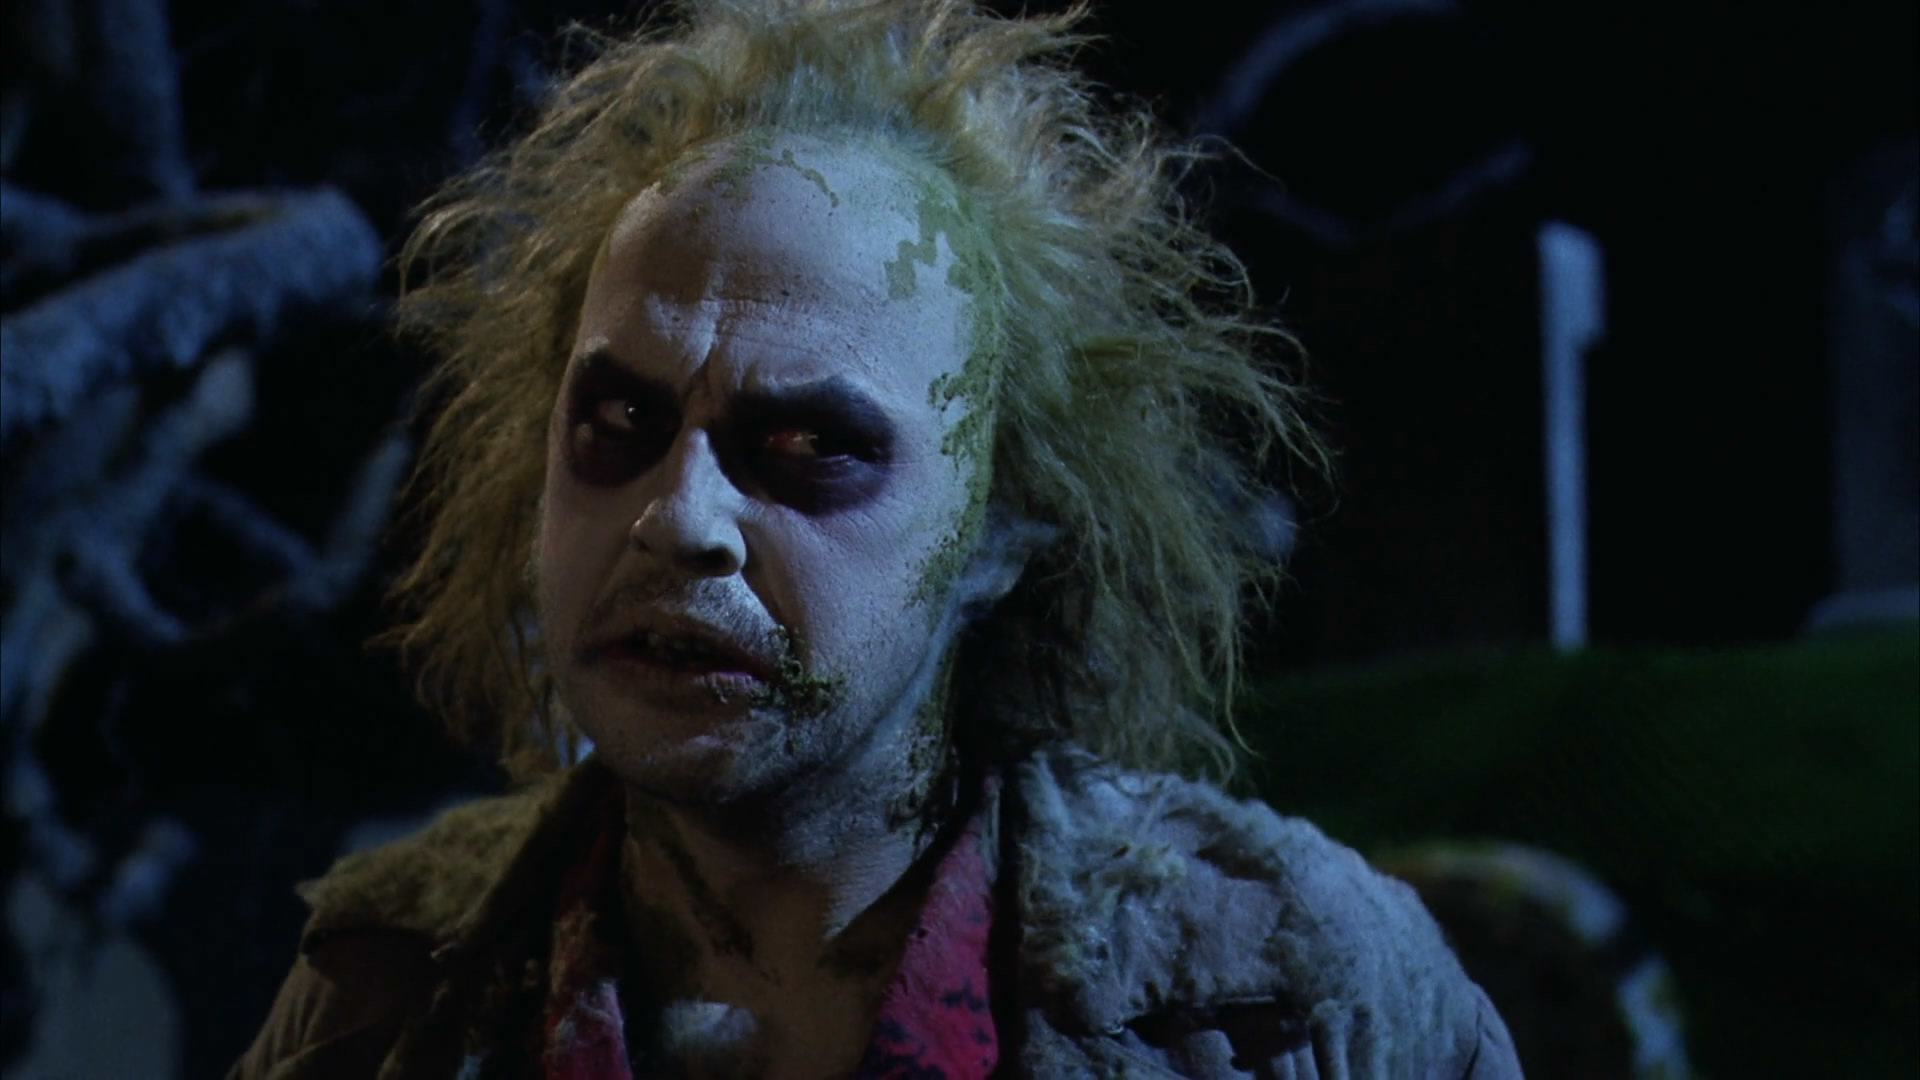 Beetlejuice (Movie): A Bio-Exorcist, a ghost who can exorcise the living. 1920x1080 Full HD Wallpaper.